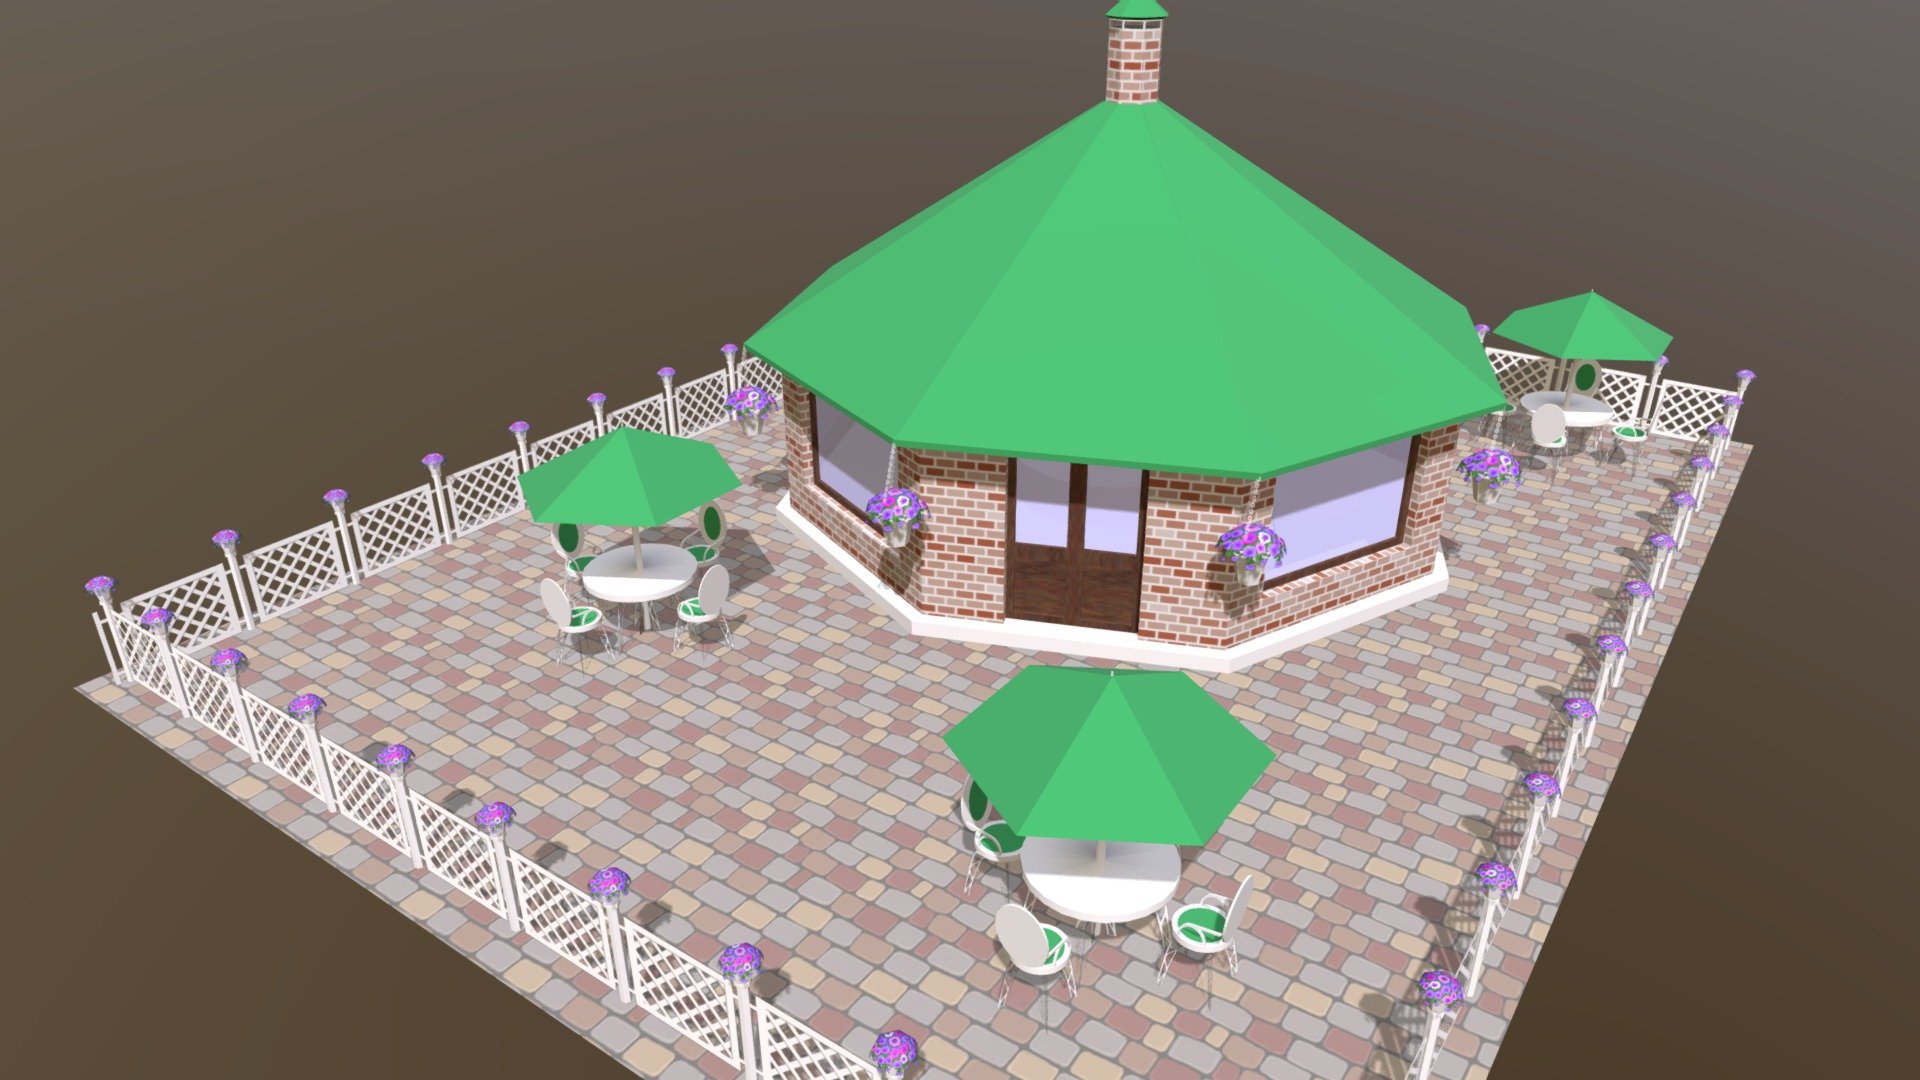 A small scene with several small objects: a summer caffee-shop, tables with umbrella, fences with flower pots. LowPoly. Textured.
Made by @yellika optimized by @Moora and me. Part of our Forest Riders driving simualtor game 3d model